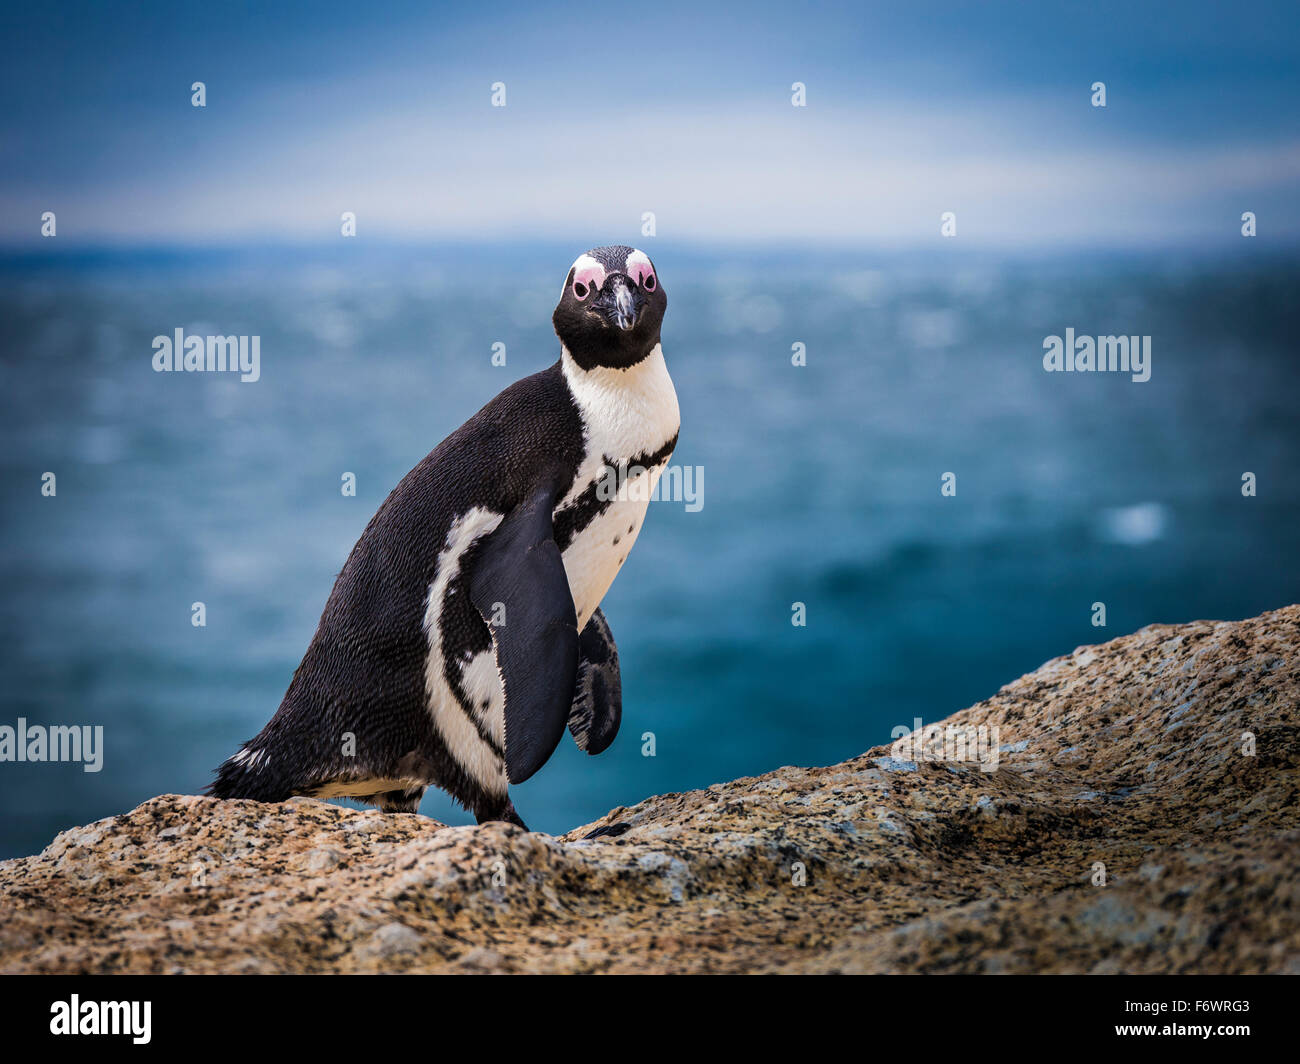 African penguin, Boulders Beach, Simonstown, Cape Town, Western Cape, South Africa Stock Photo